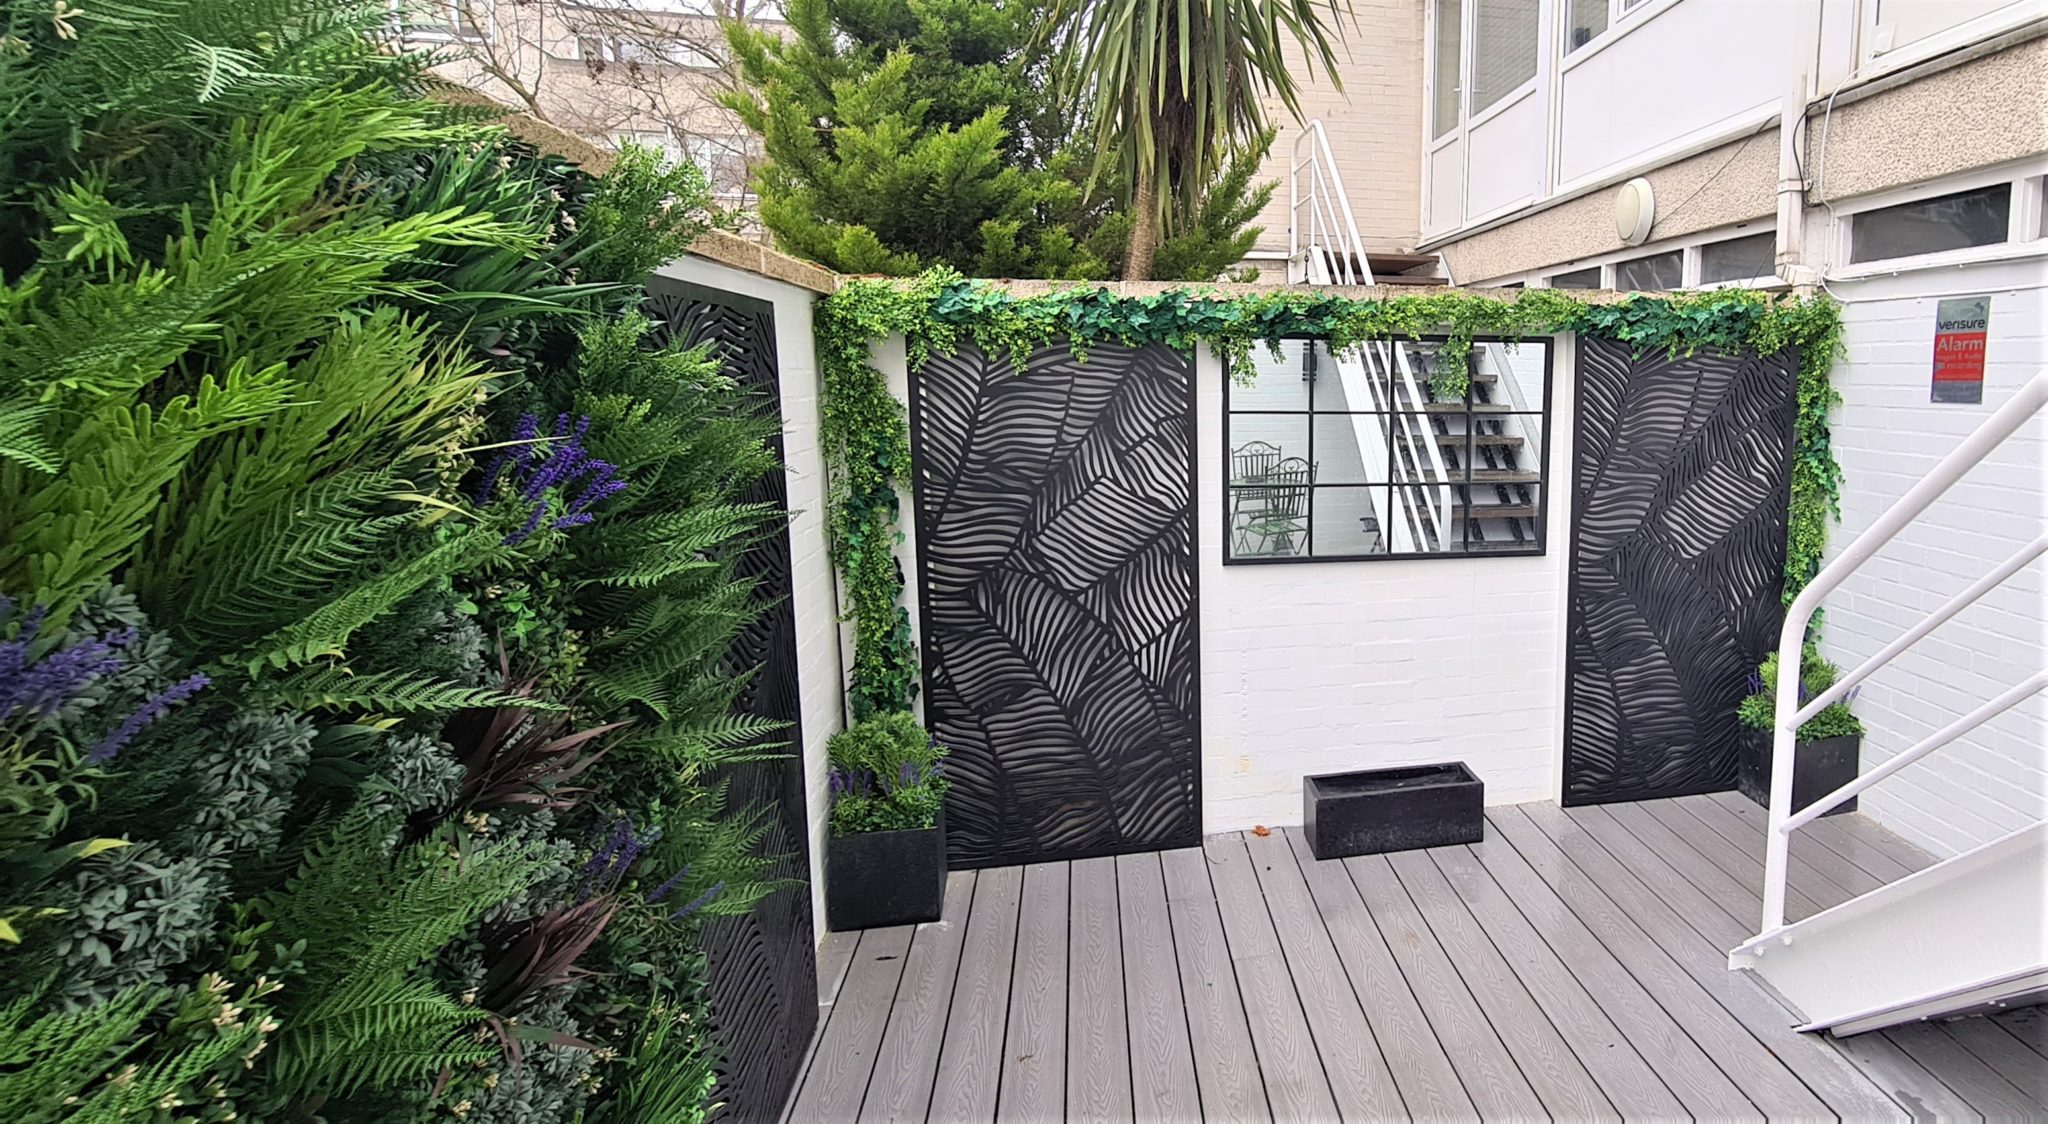 A green wall installation in a windsor courtyard